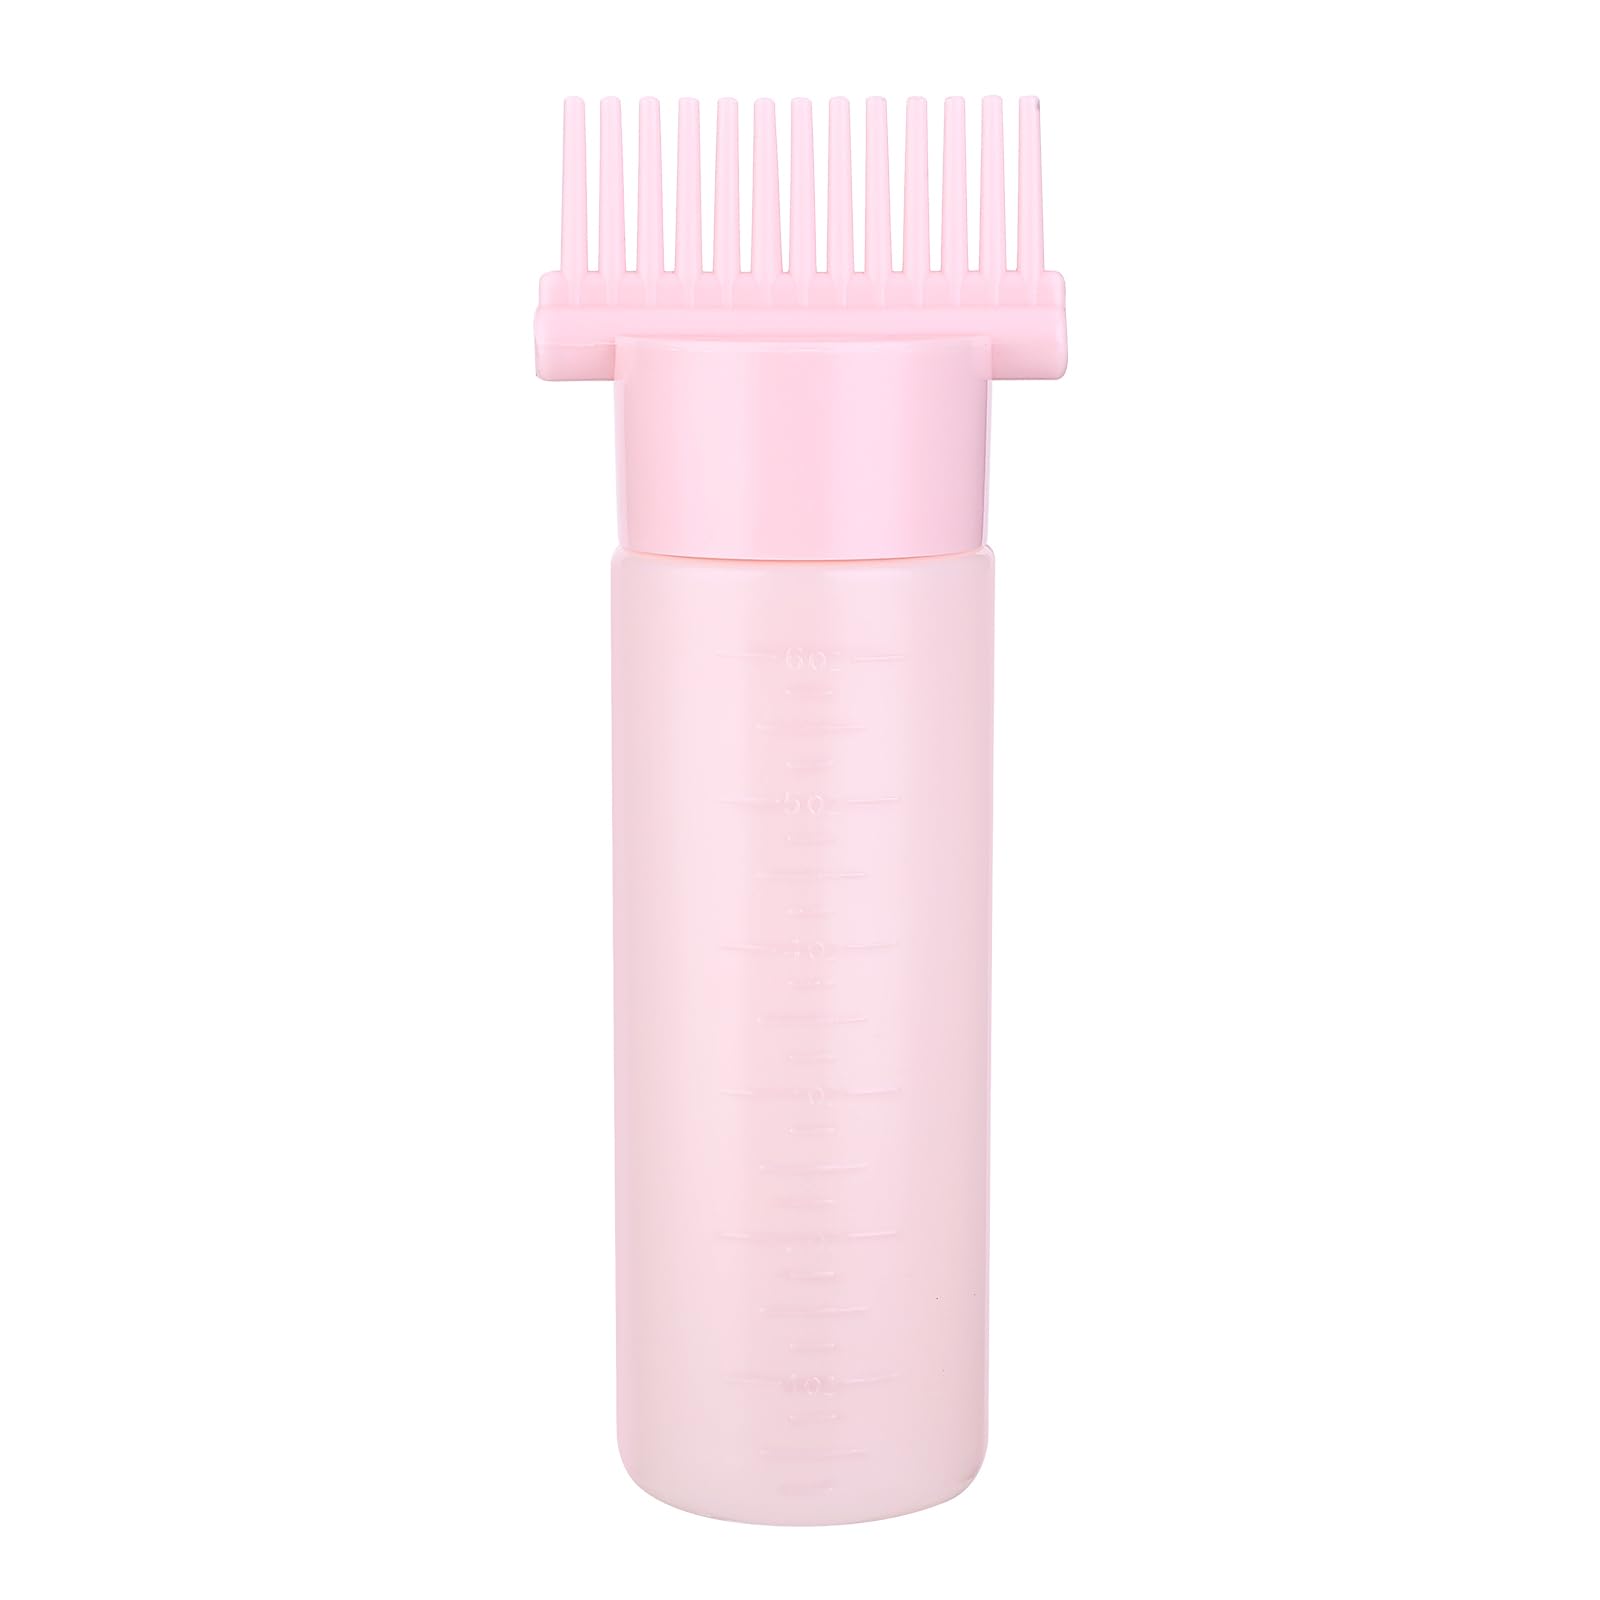 Sibba Root Comb Applicator Bottle, 6 Ounce Hair Oil Applicator Applicator  Bottle for Hair Dye Bottle Applicator Brush with Graduated S